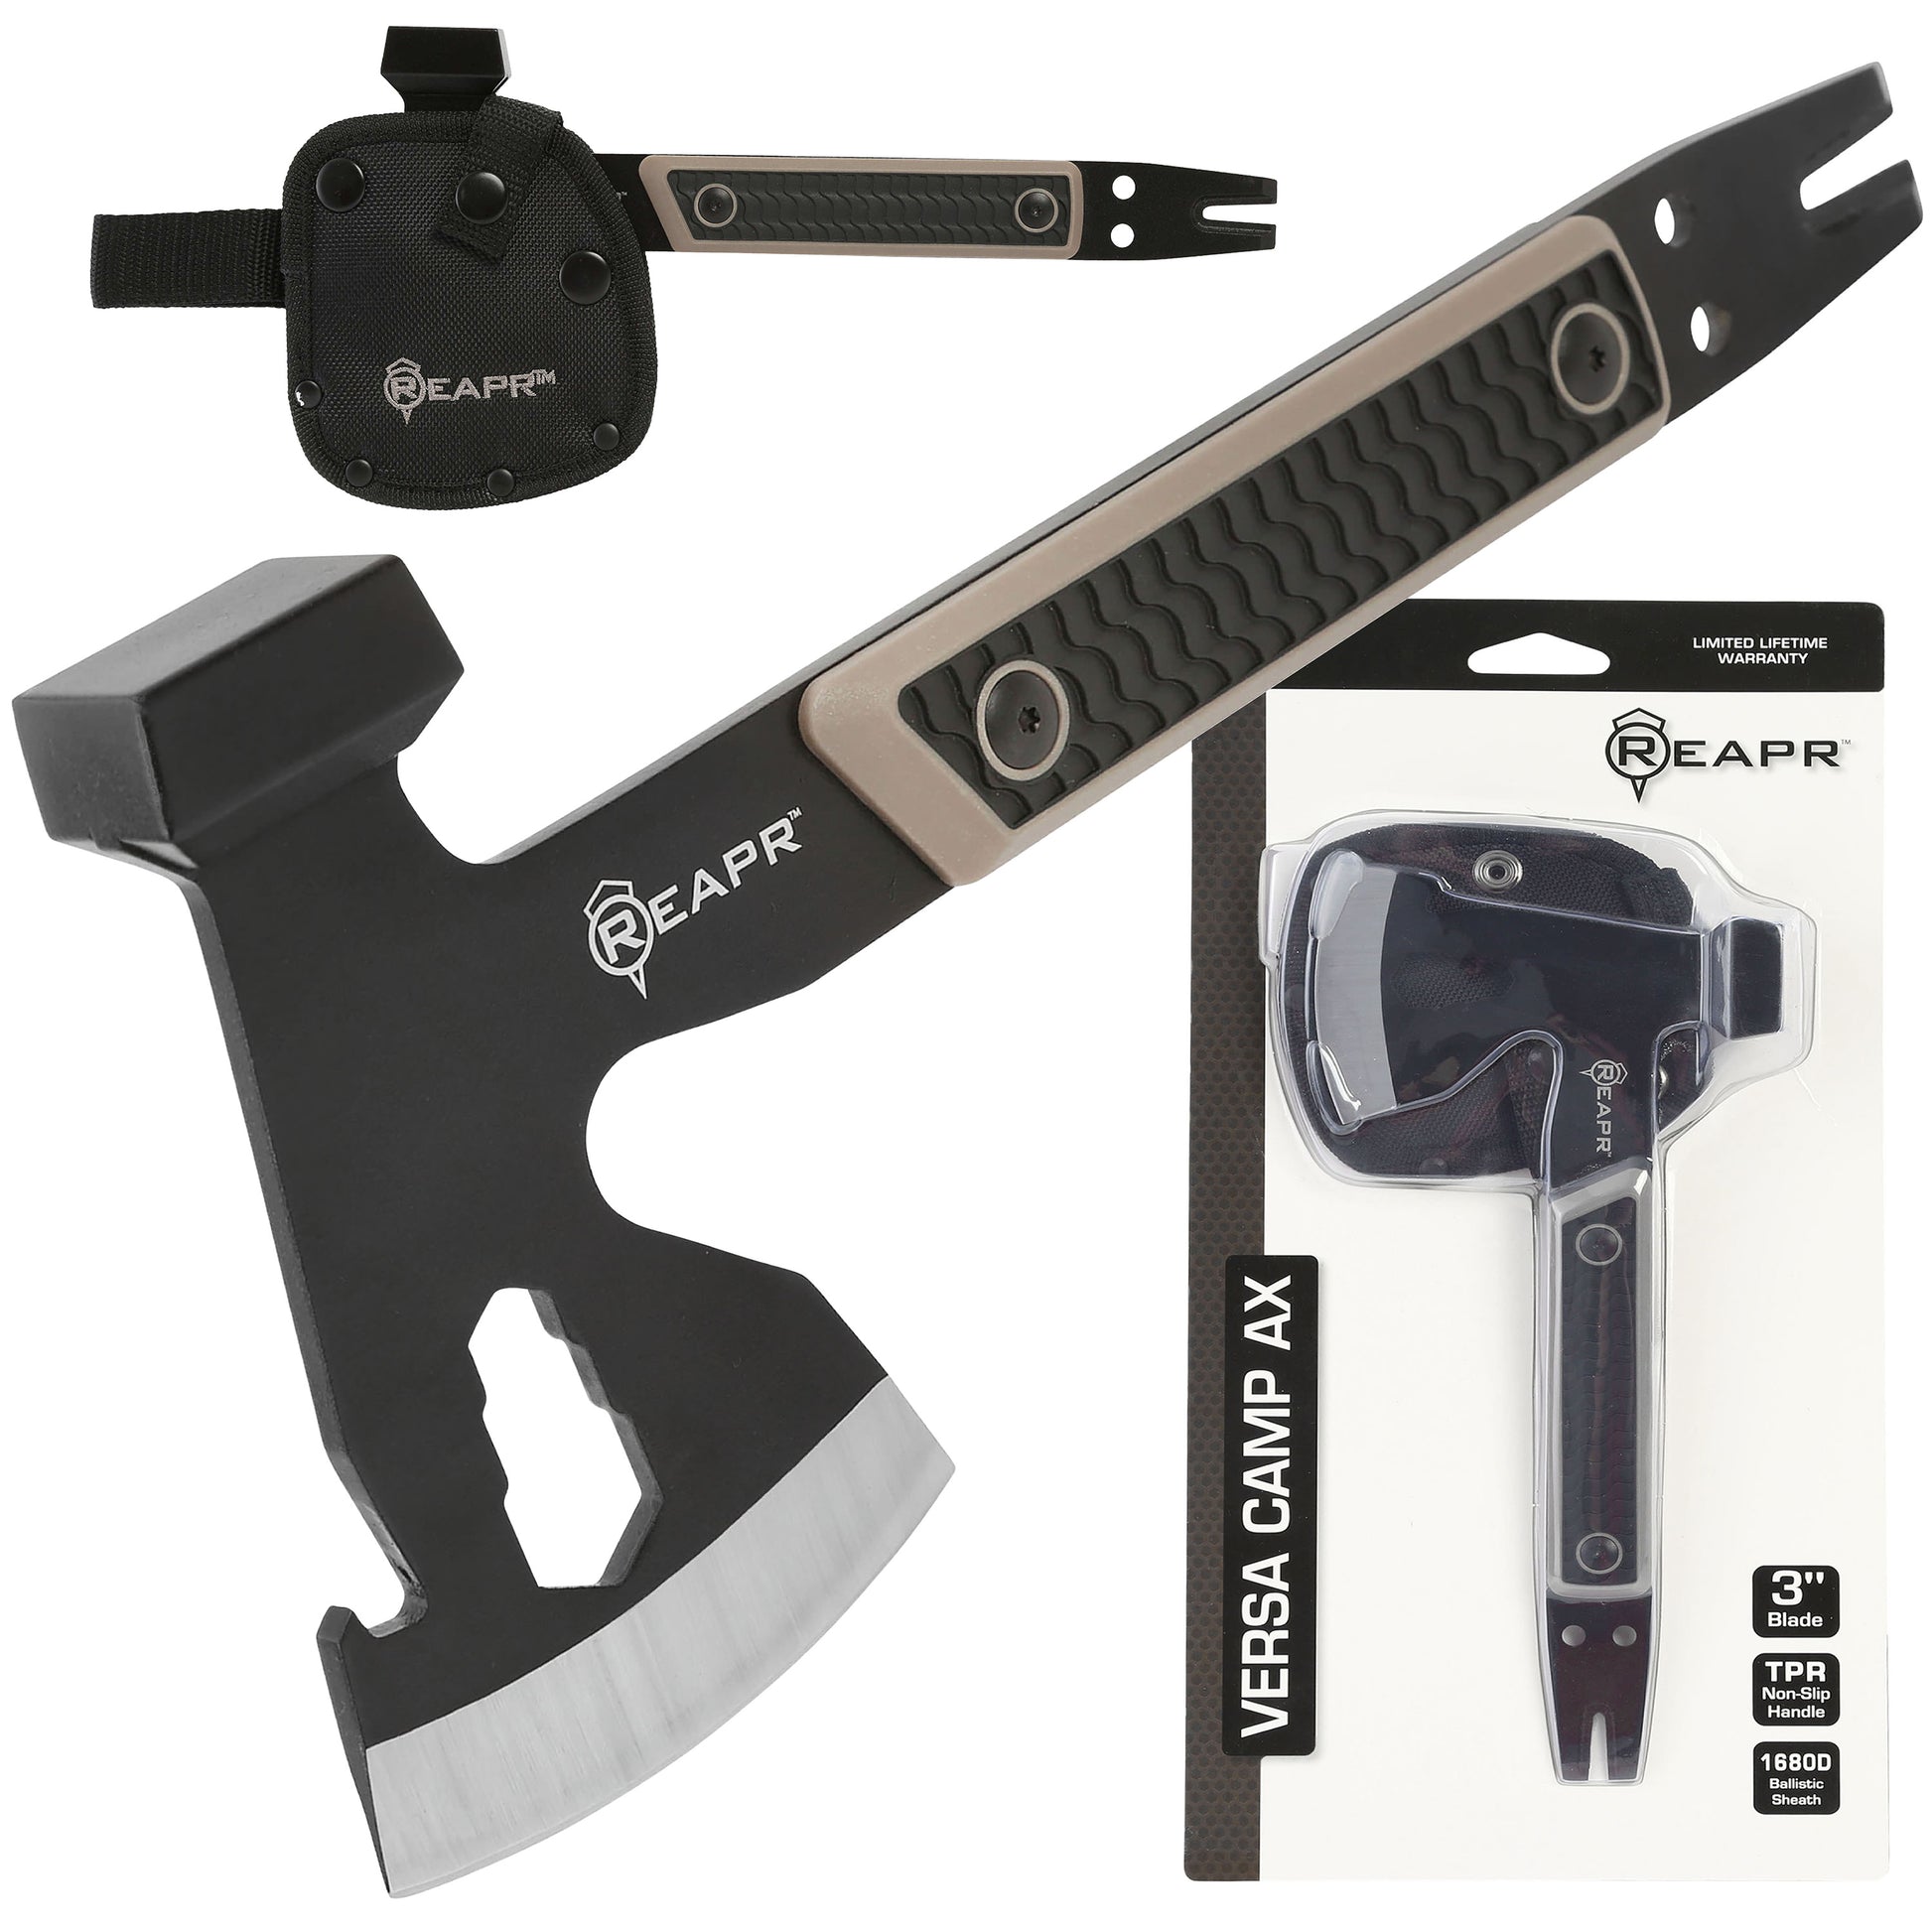 REAPR 11014 VERSA Multitool camping axe with 3" axe head, but a 3-wrench set (10 mm, 13 mm, 16mm), cast hammer, pry bar, nail puller and a bottle opener.